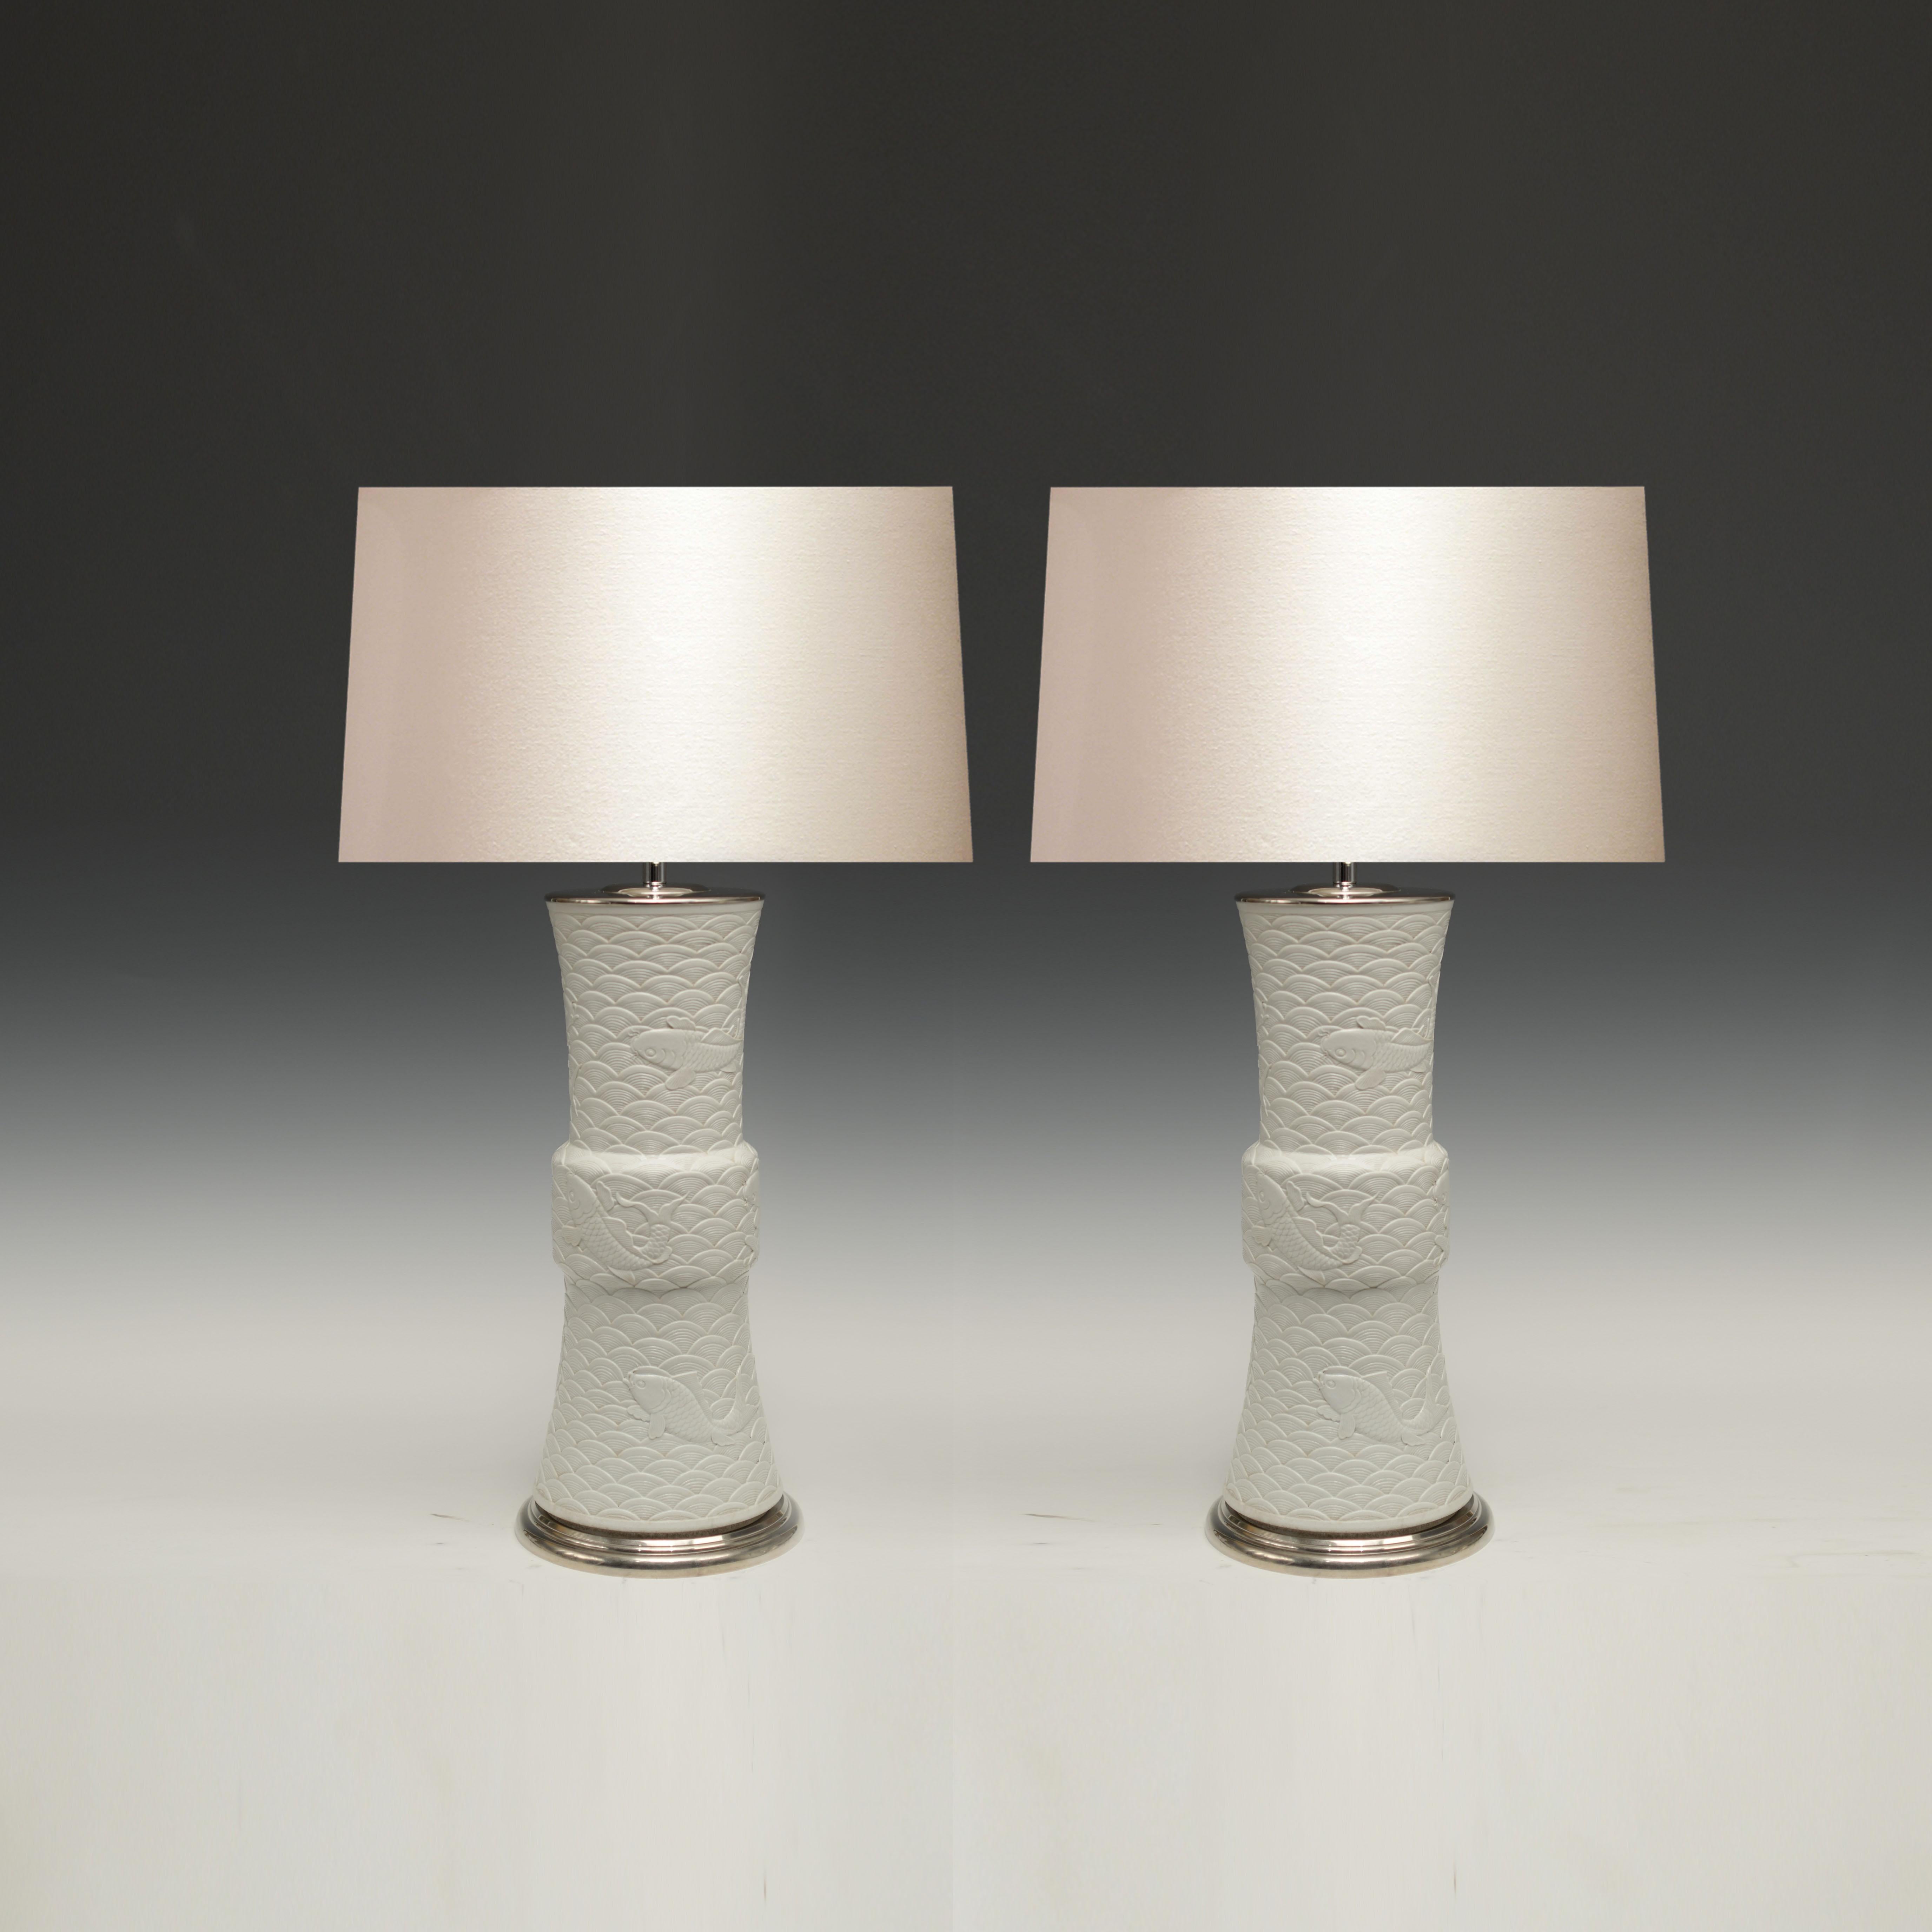 Pair of fine carved porcelain lamps with fishers swim in stylish waves decorations.
To the top of the porcelain 19